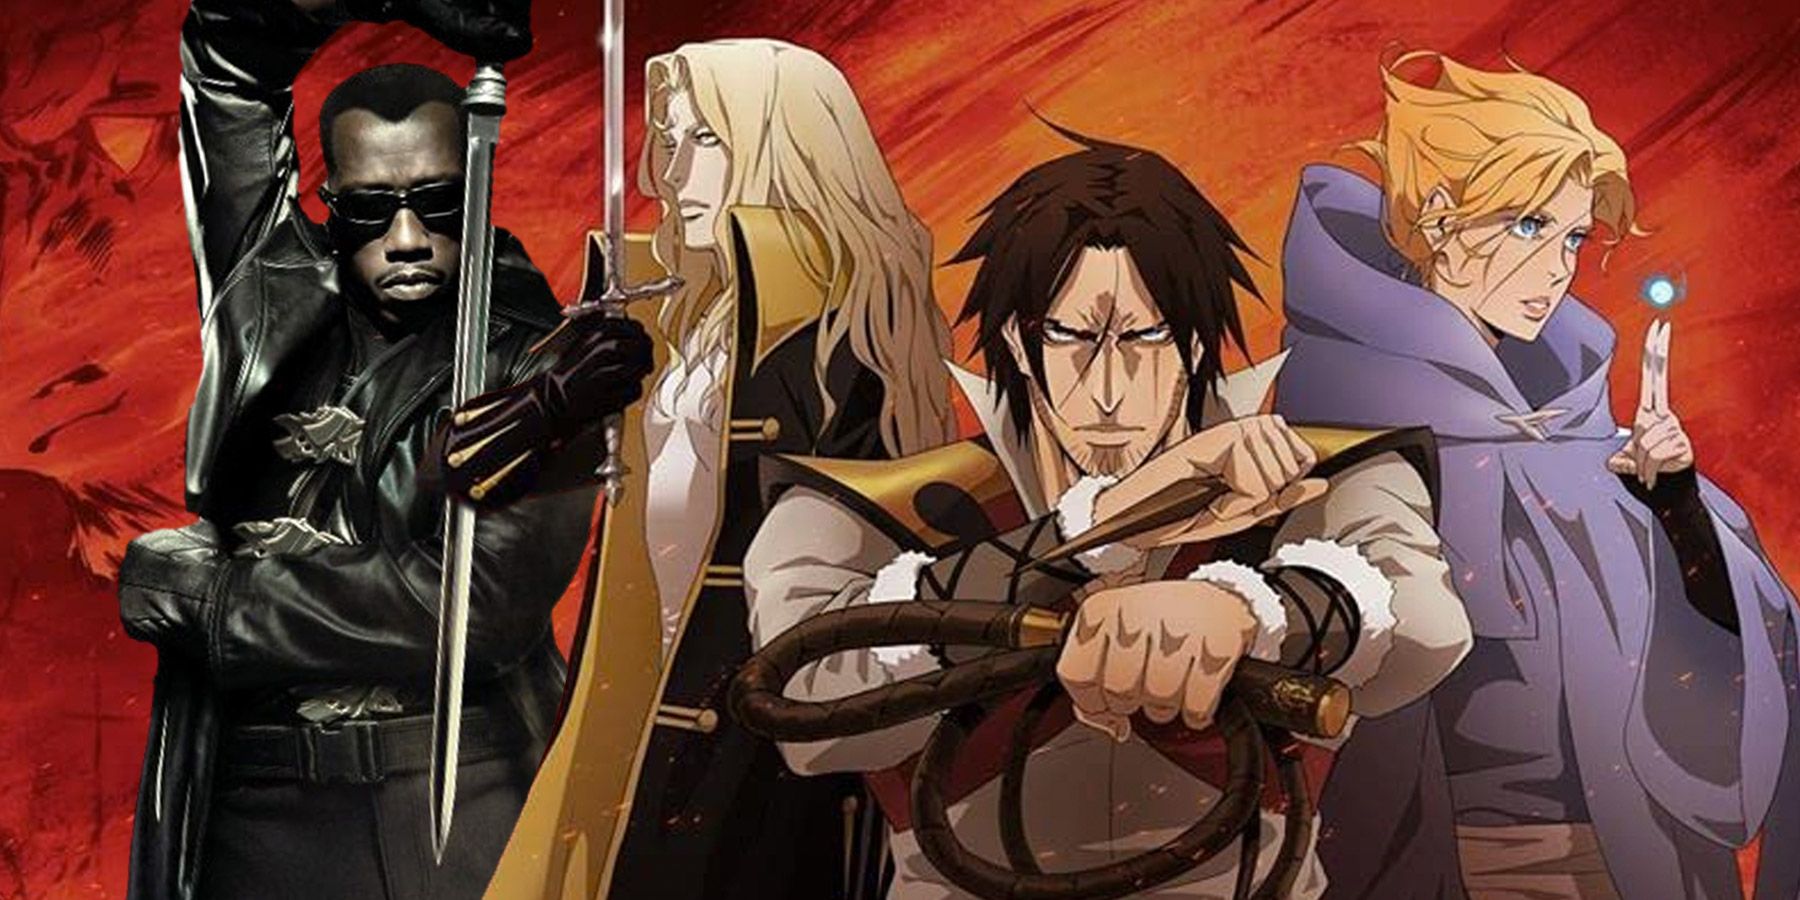 A Blade Marvel Video Game Could Fill the Void Castlevania Left